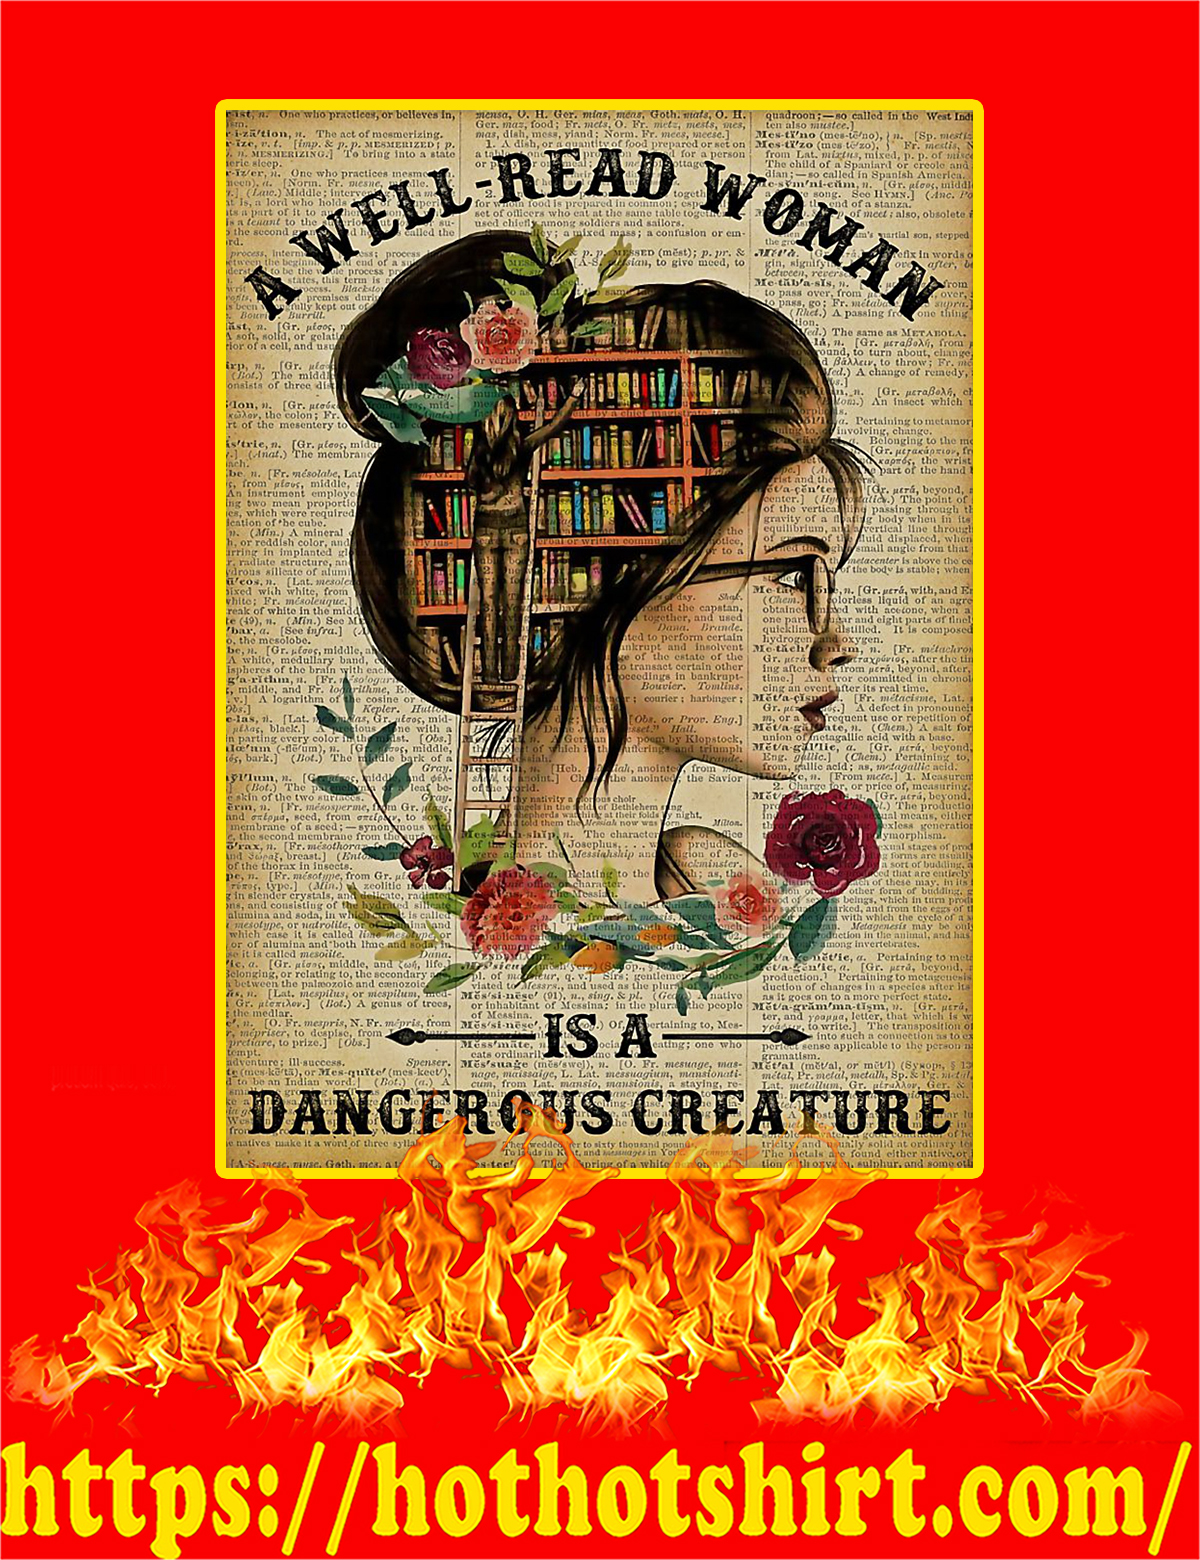 A Well Read Woman Is A Dangerous Creature Poster